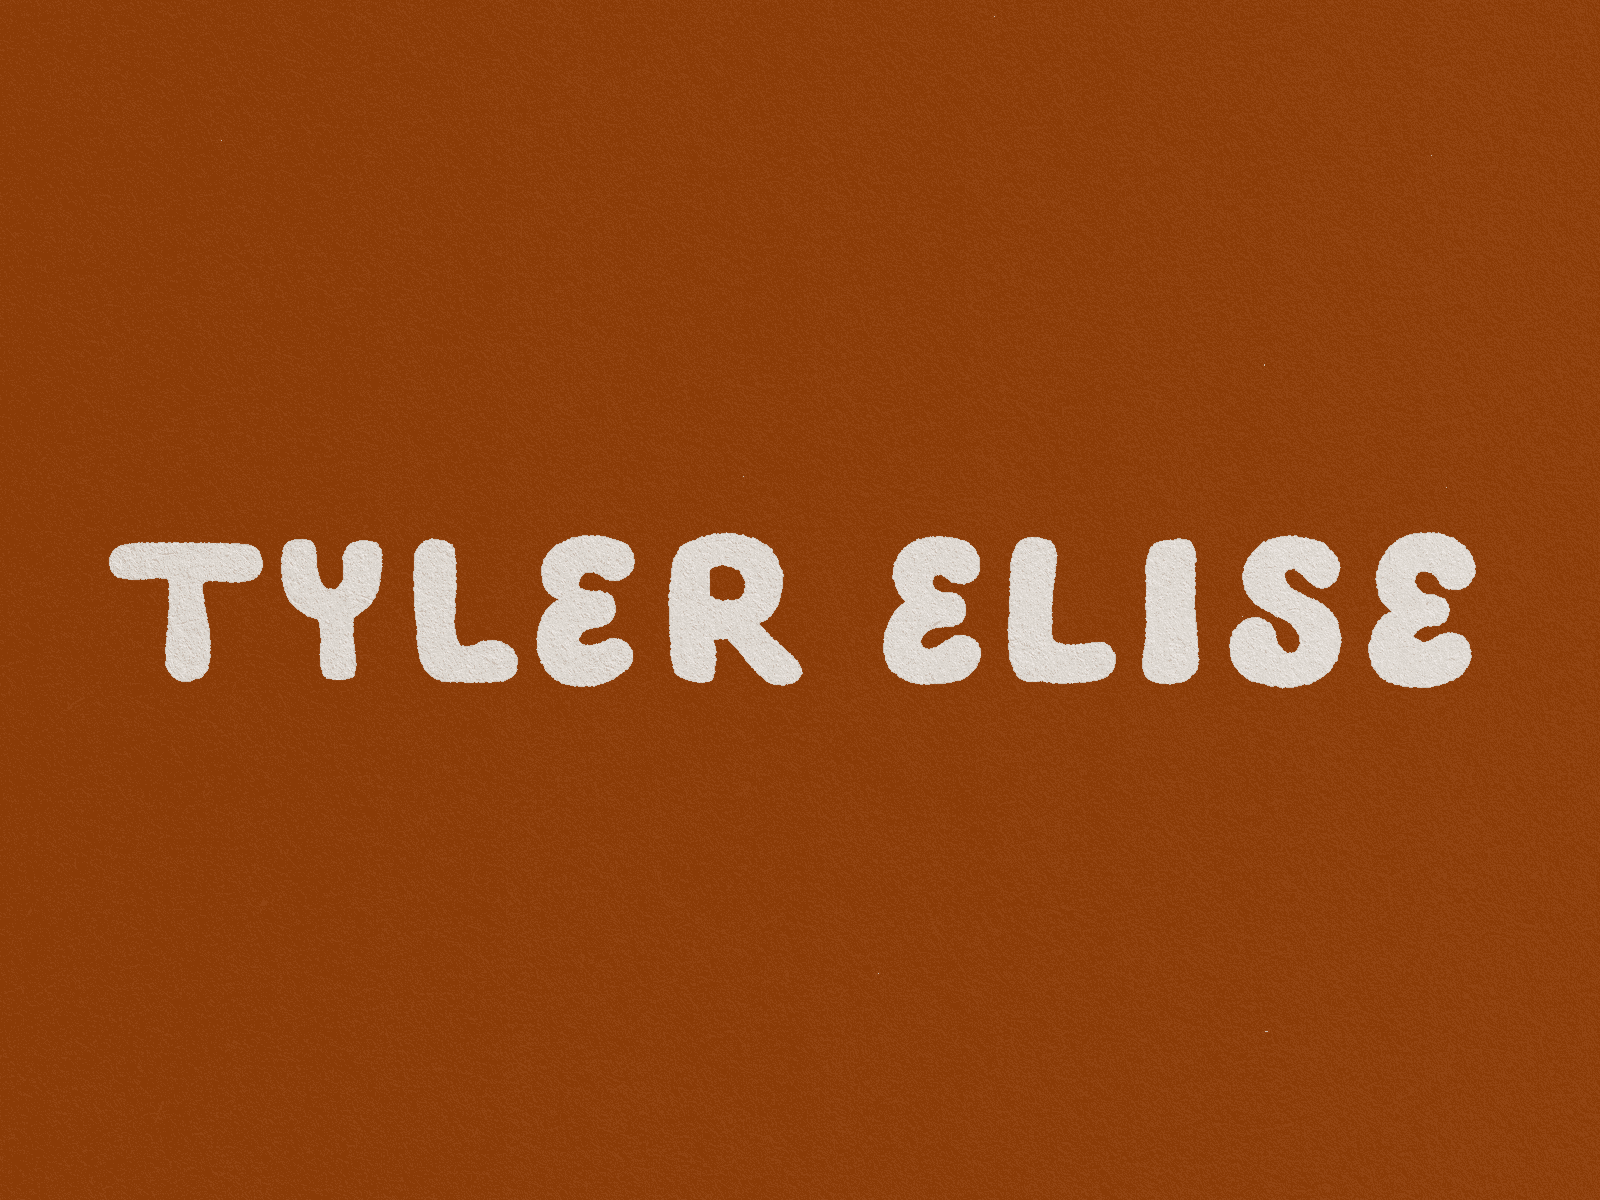 Tyler Elise Morph 2.0 animated logo animated type animation branding floral flowers frame by frame frame by frame animation hand lettering handmade illustration logo logo animation motion graphics photoshop procreate texture true grit texture supply typography wonky